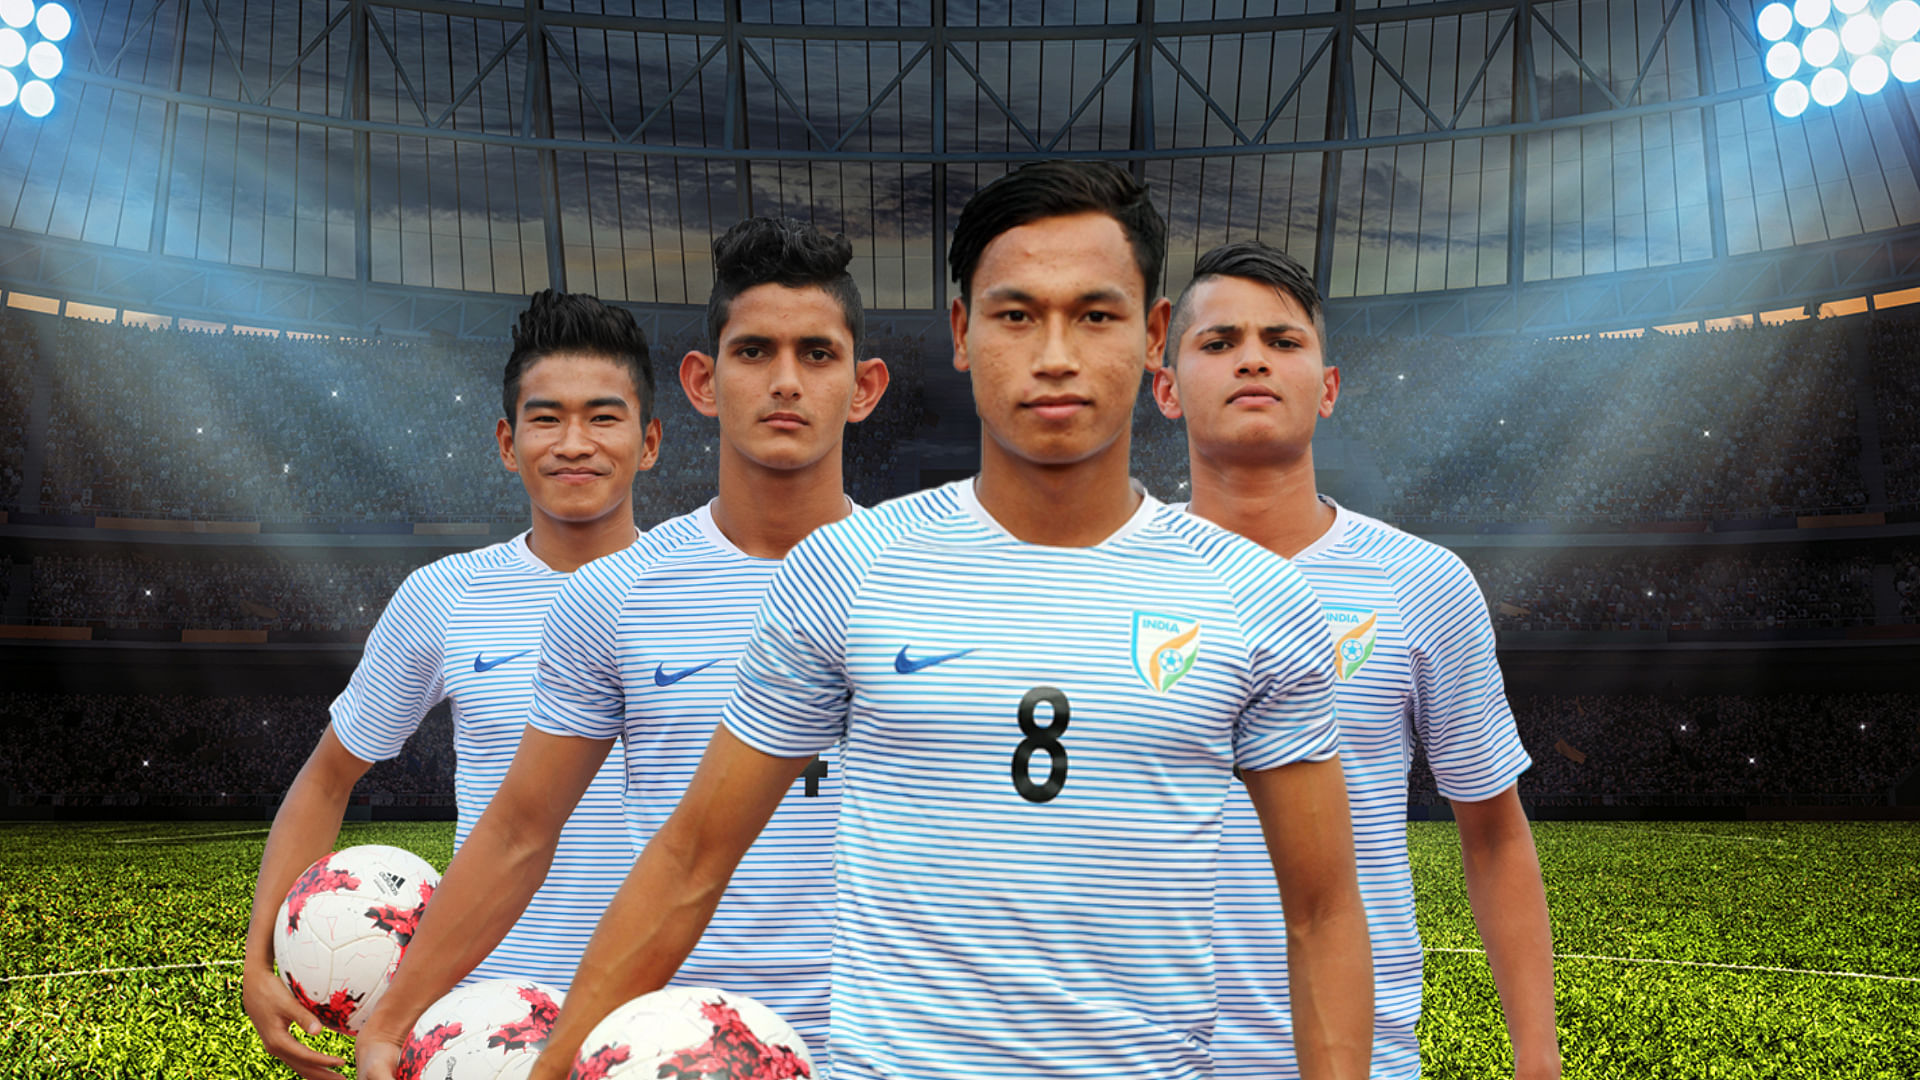 The Under-17 Indian football team.